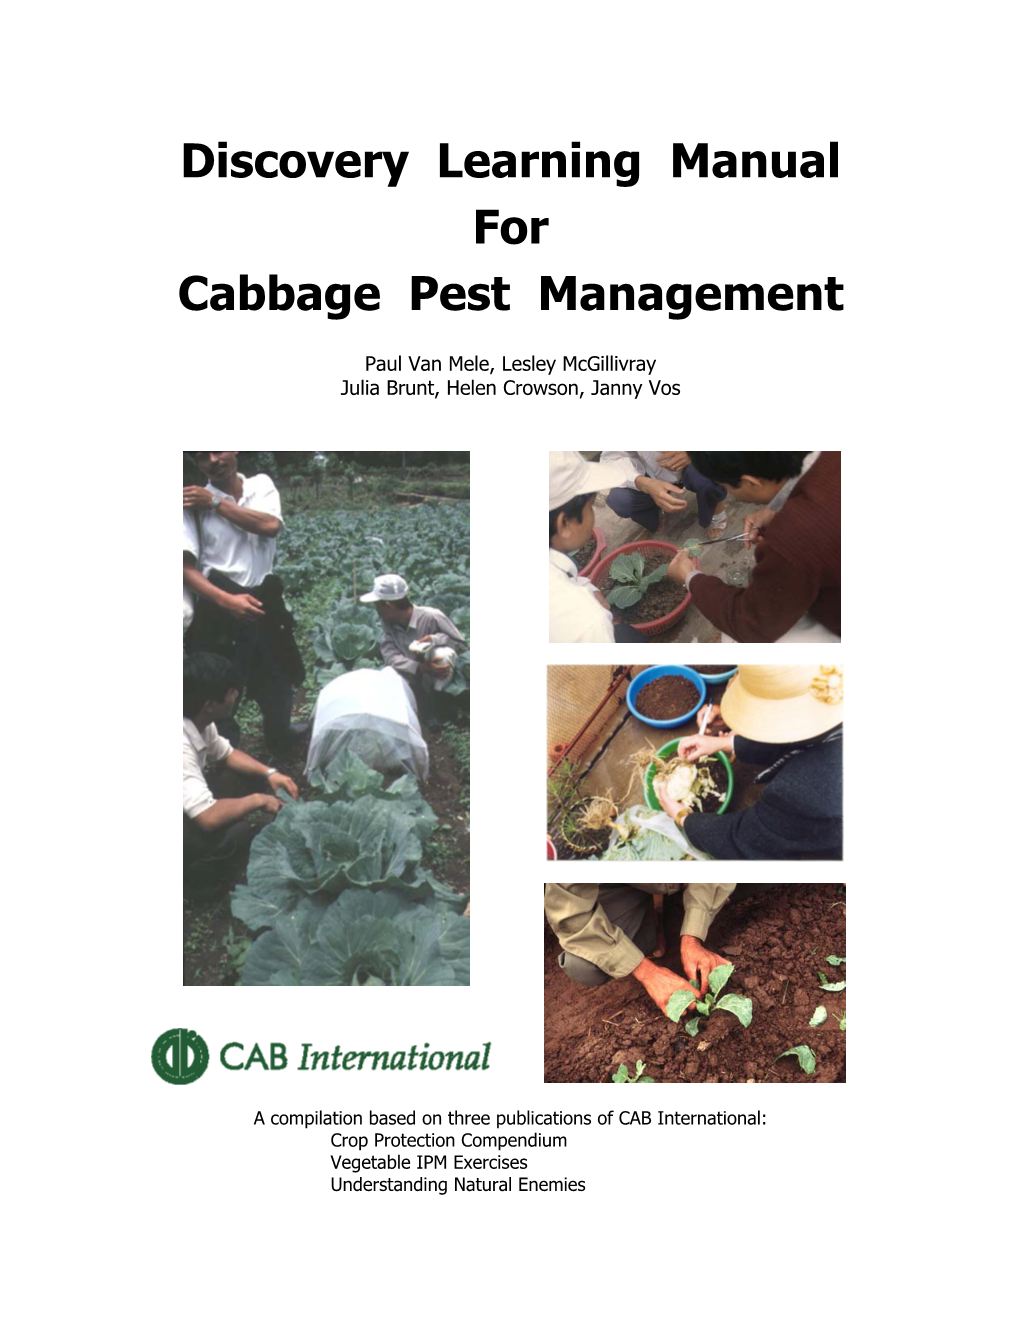 Discovery Learning Manual for Cabbage Pest Management